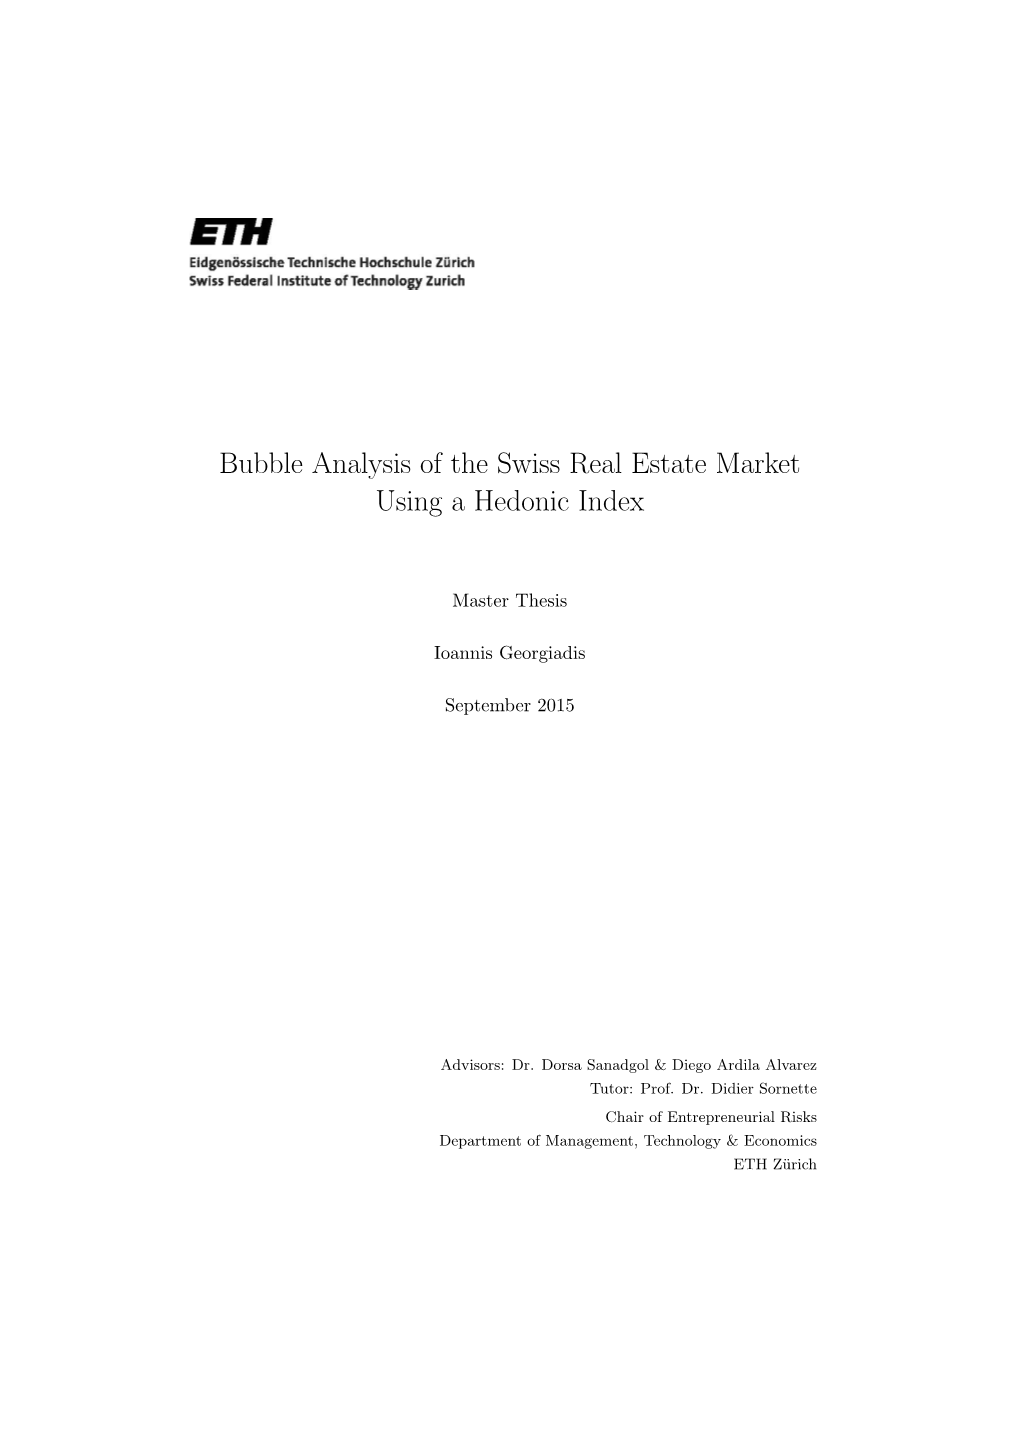 Bubble Analysis of the Swiss Real Estate Market Using a Hedonic Index